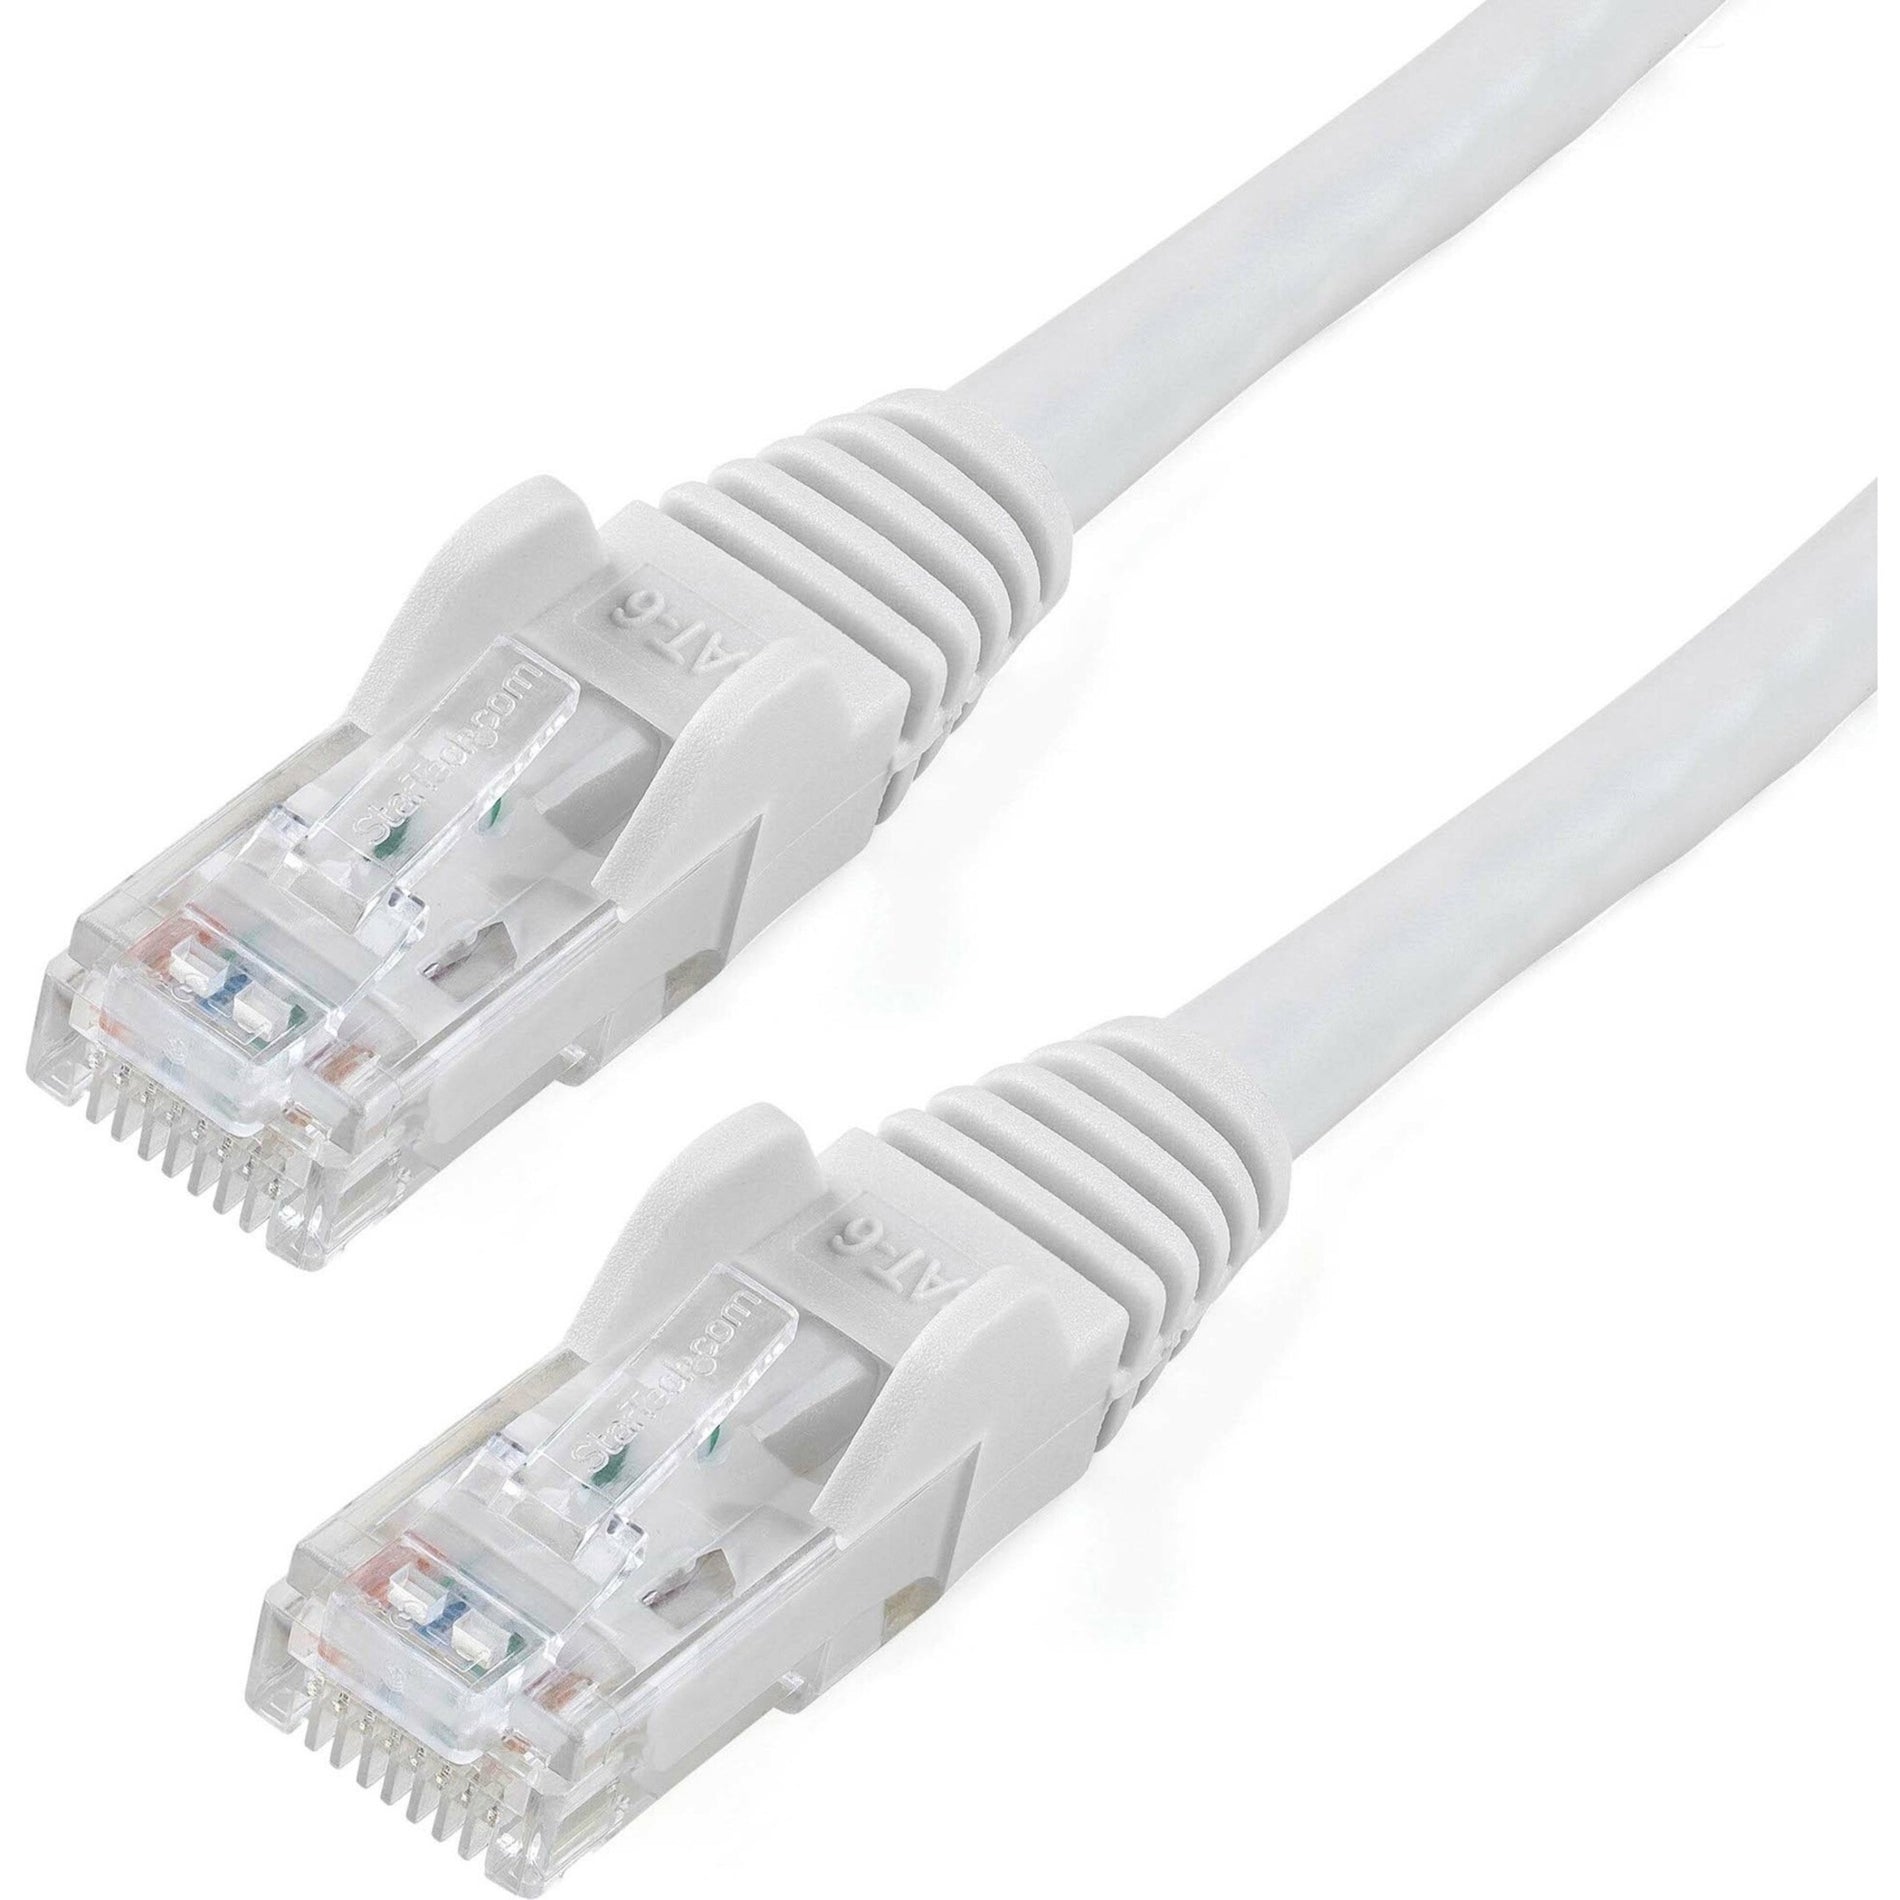 StarTech.com N6PATCH150WH Cat6 Patch Cable, 150ft White Ethernet Cable, Snagless RJ45 Connectors